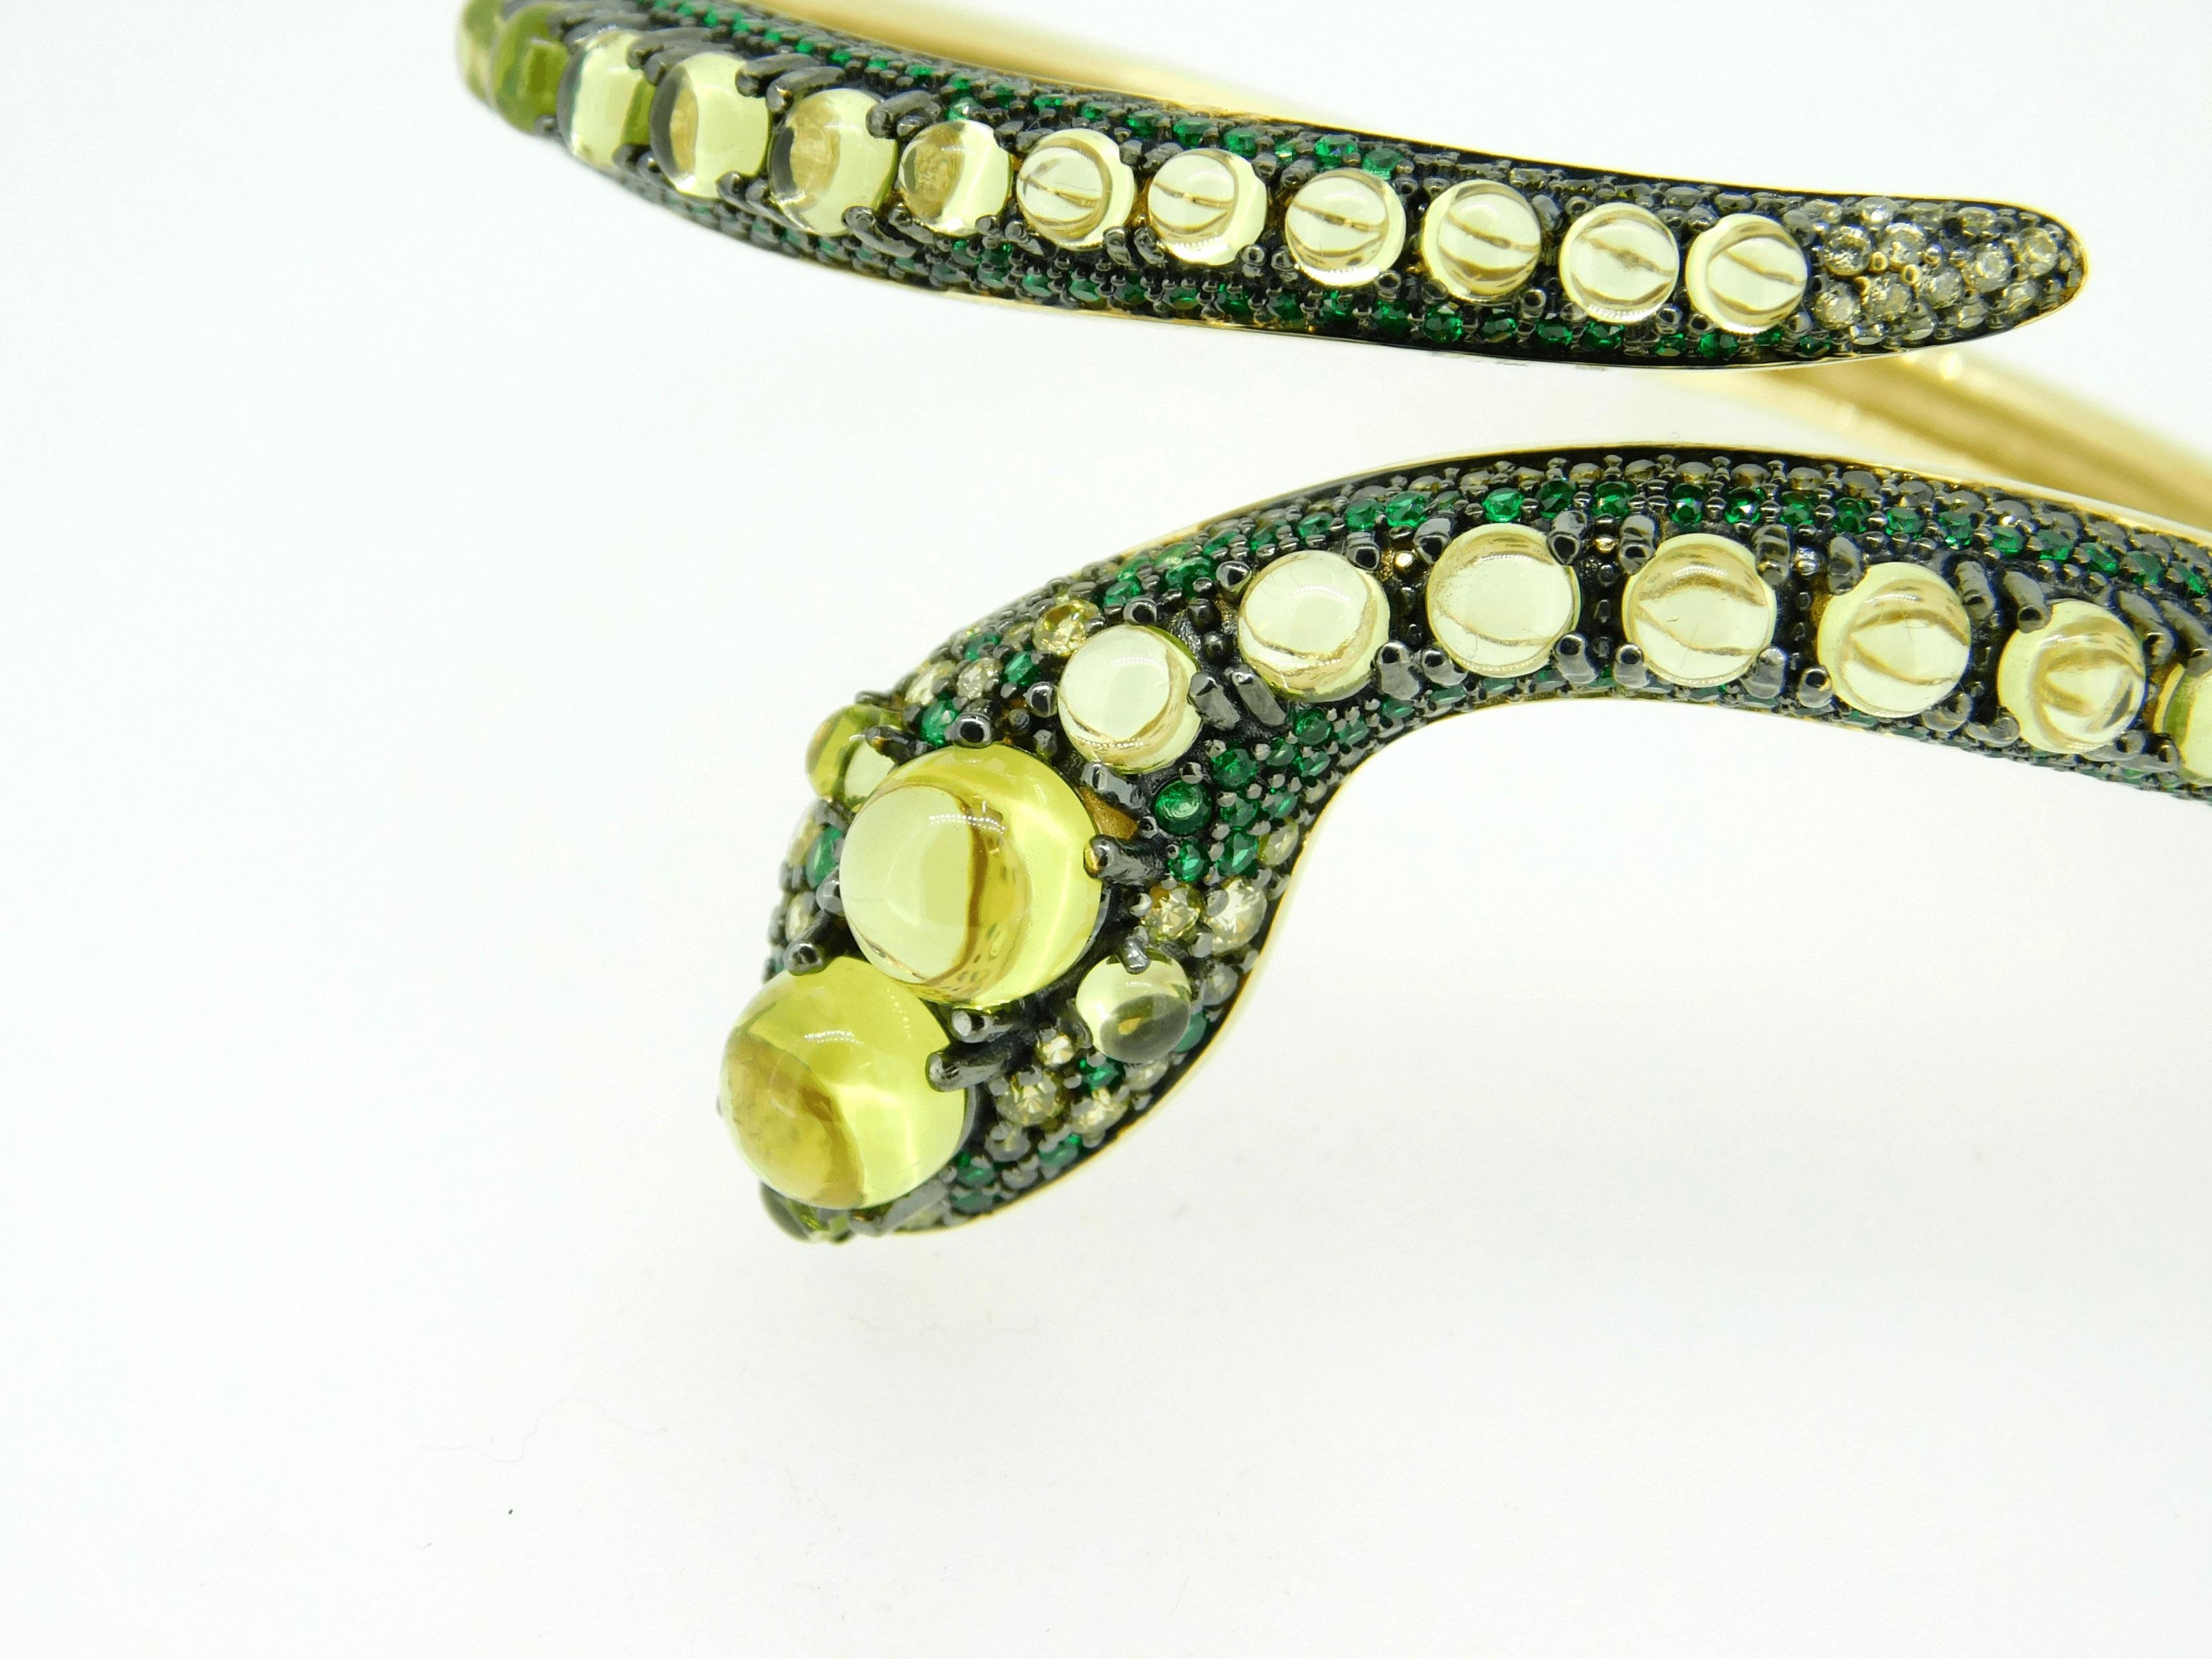 14k Yellow Gold Genuine Natural Peridot Snake Bangle Bracelet (#J4469)
14k yellow gold snake bangle bracelet with cabochon peridot gemstones accented with multi-color green paste/glass stones. It is large, measuring 3